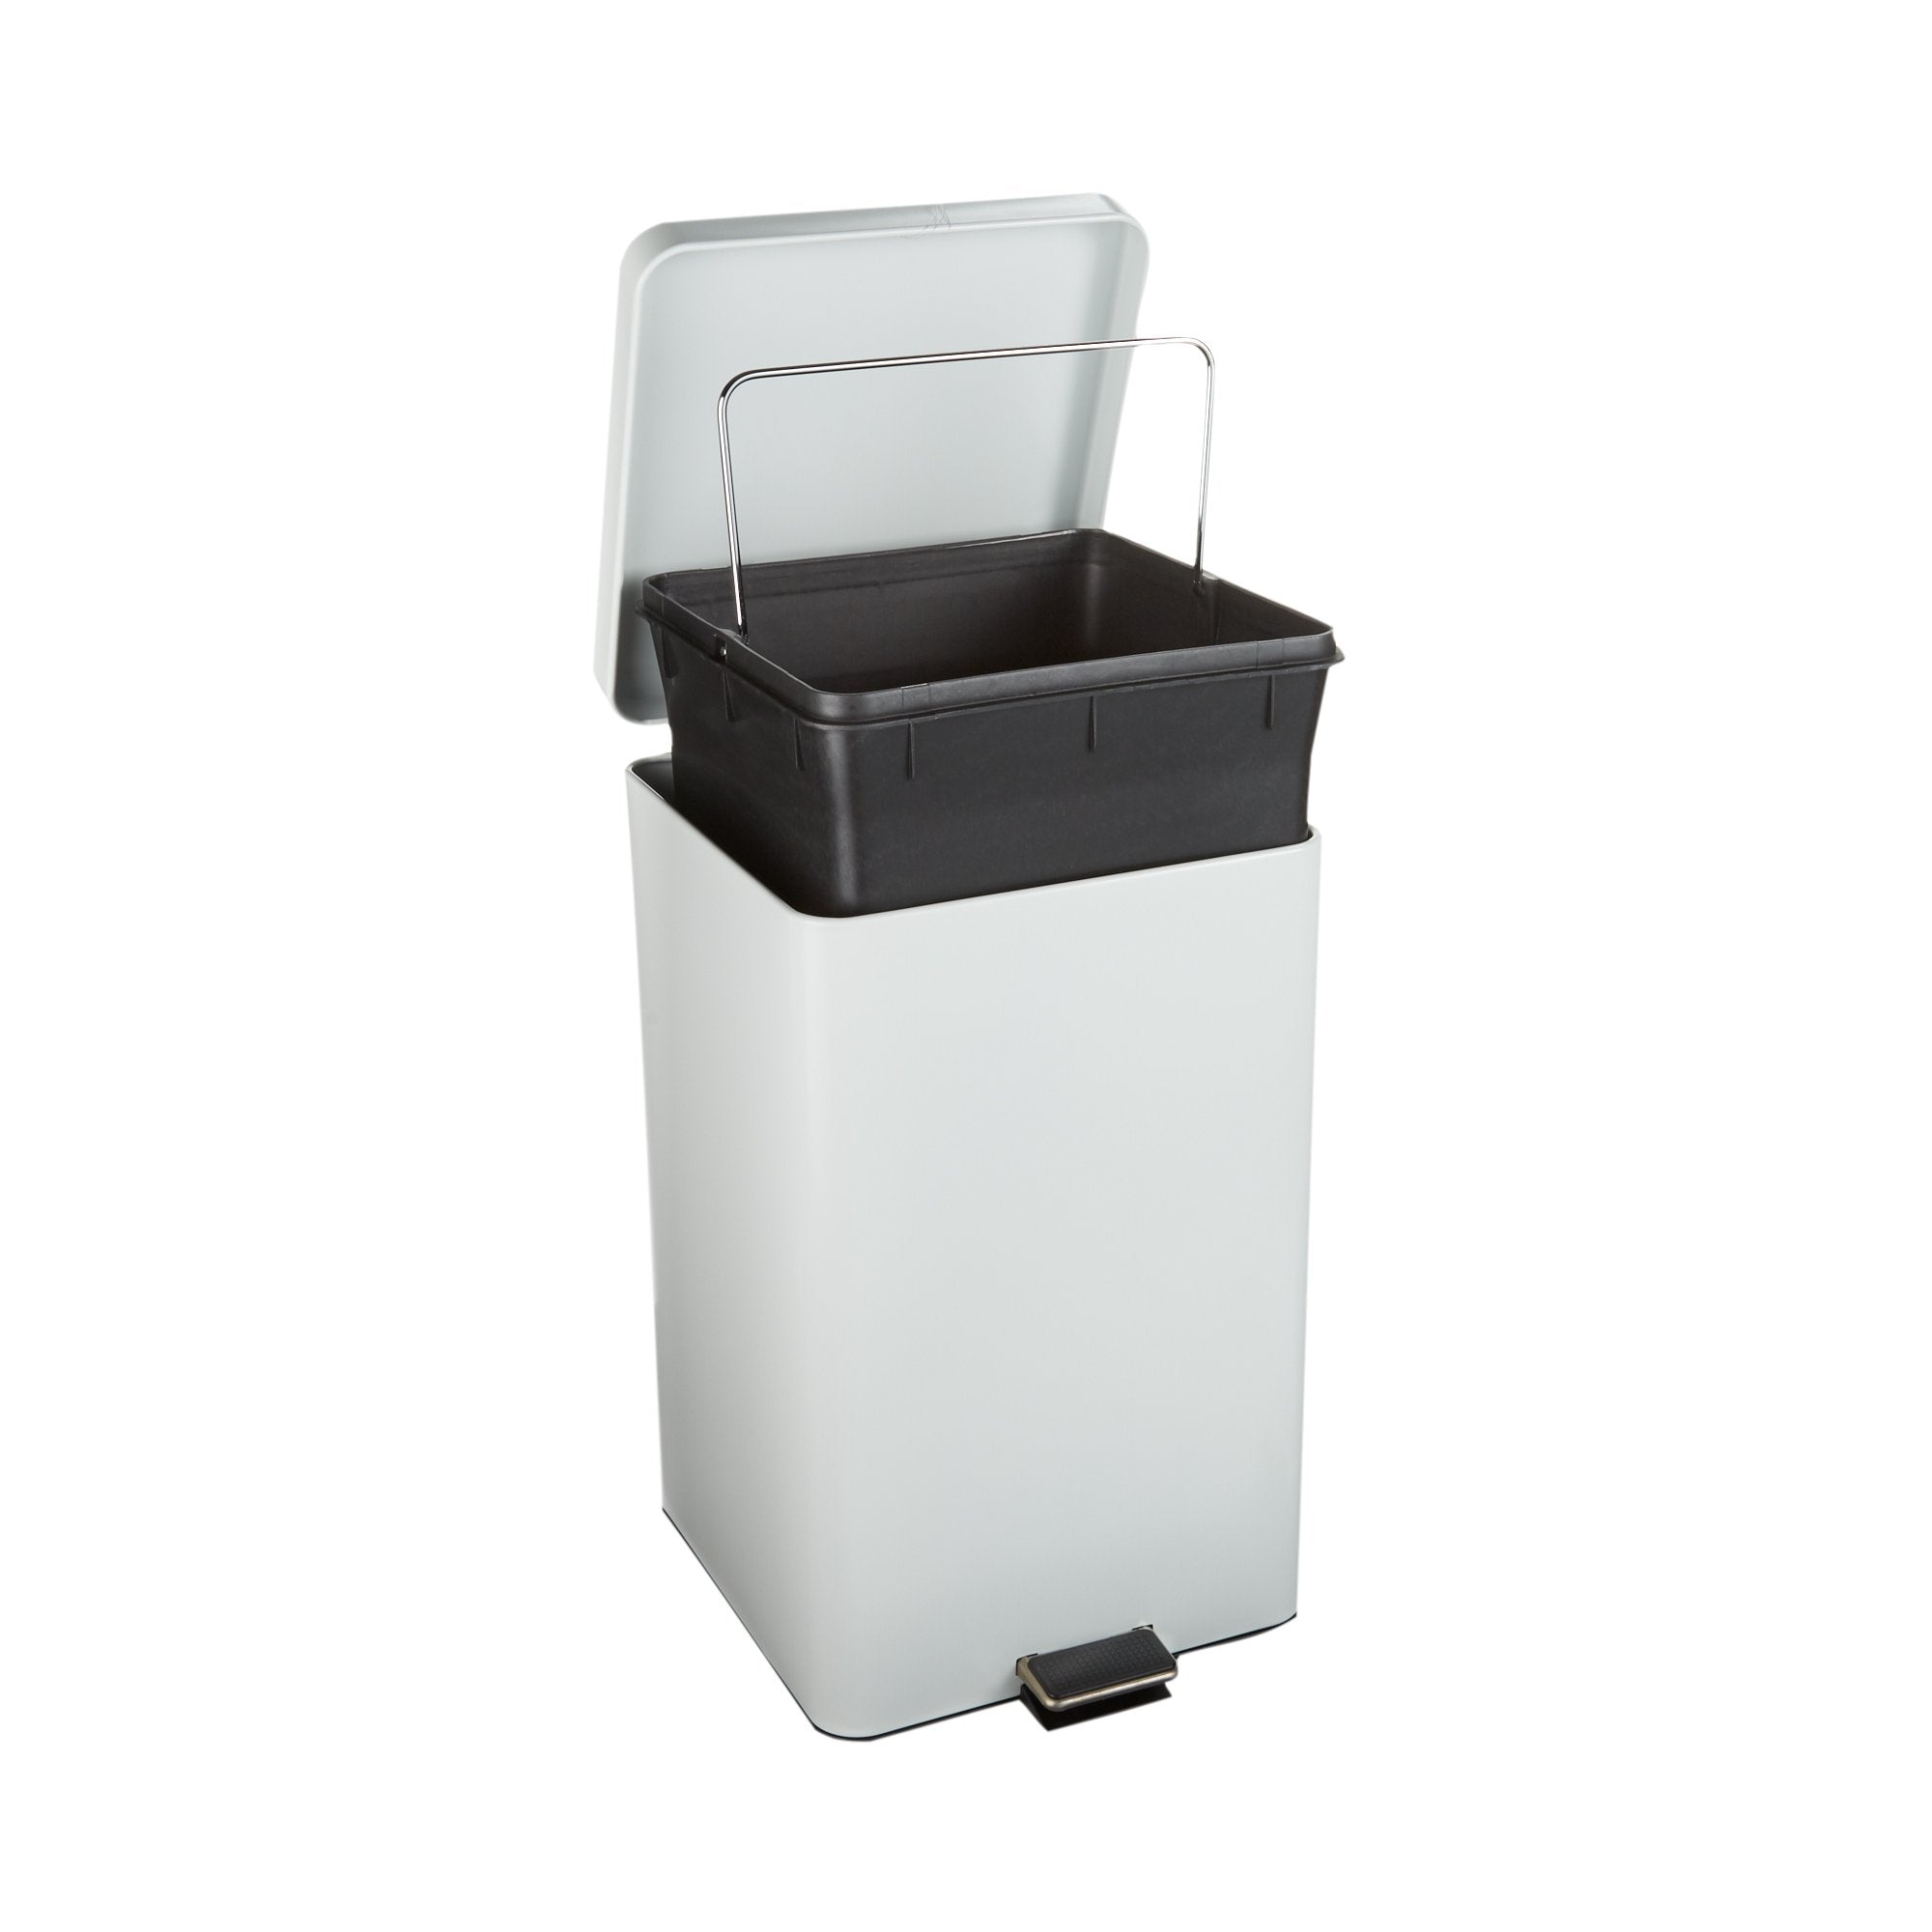 McKesson Trash Can with Plastic Liner, Square, Steel, Step-On, 32 QT